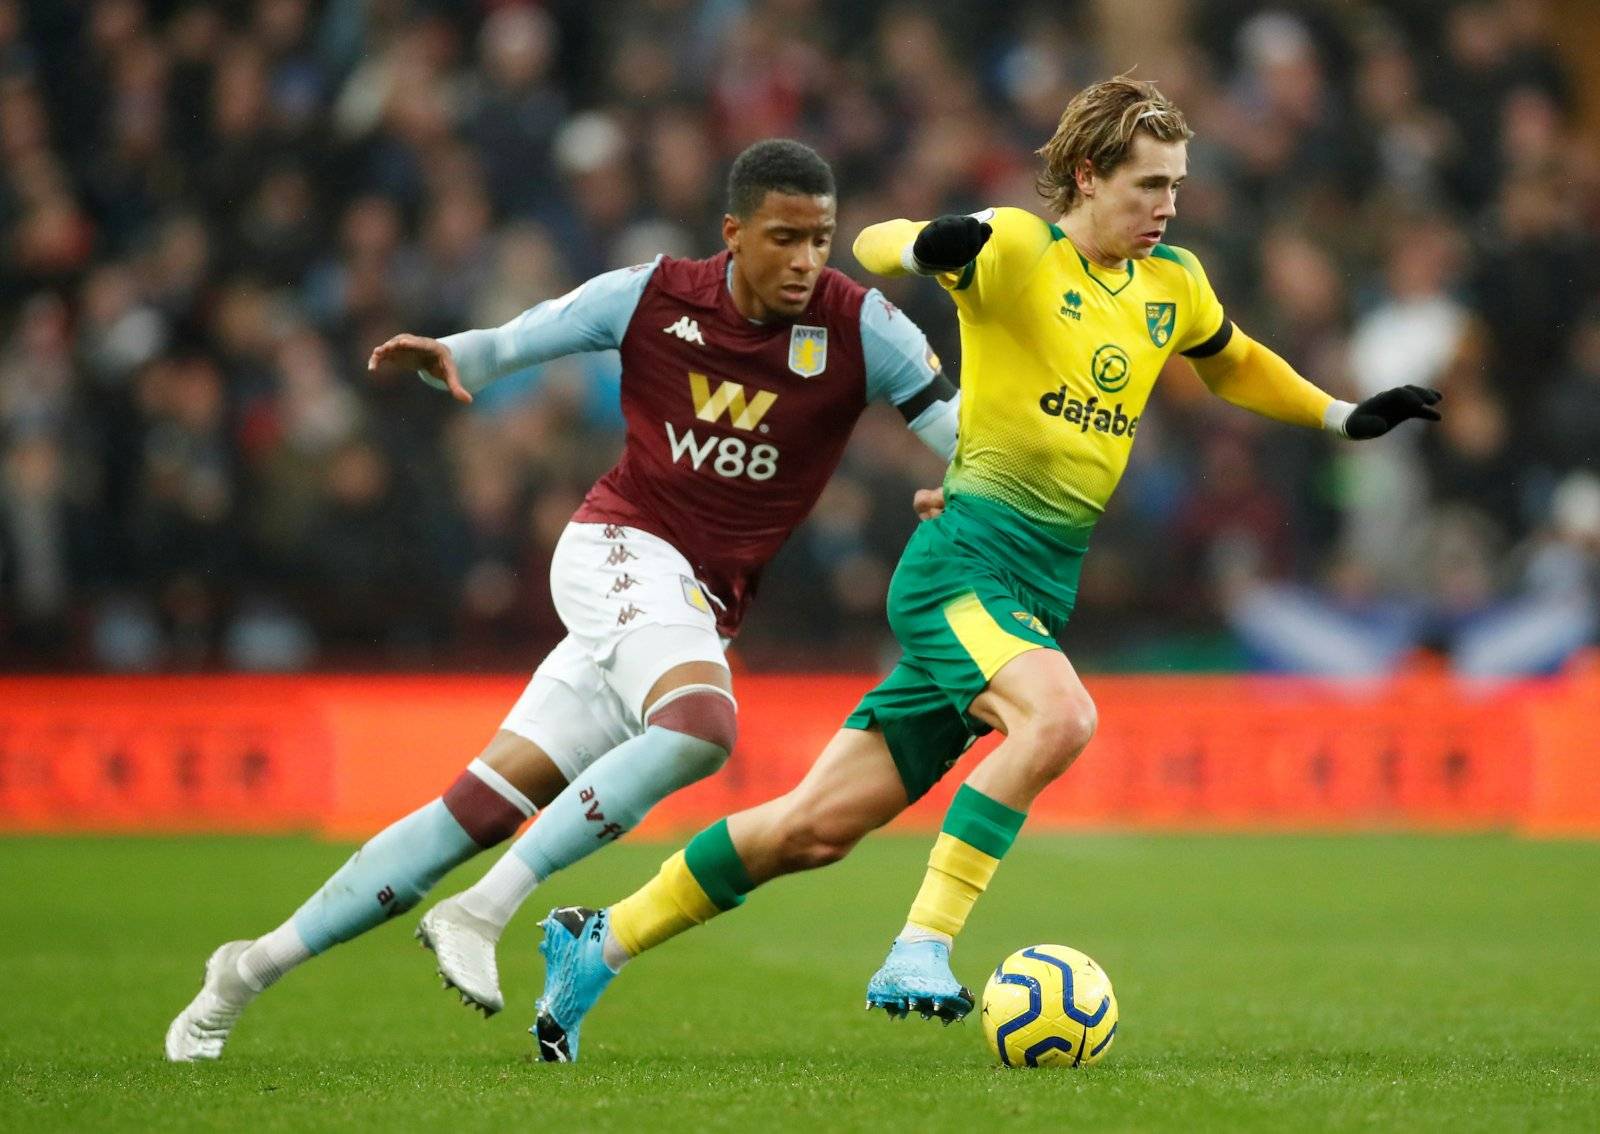 Exclusive: Dean Windass tips Aston Villa target Todd Cantwell to leave Norwich in January - Aston Villa